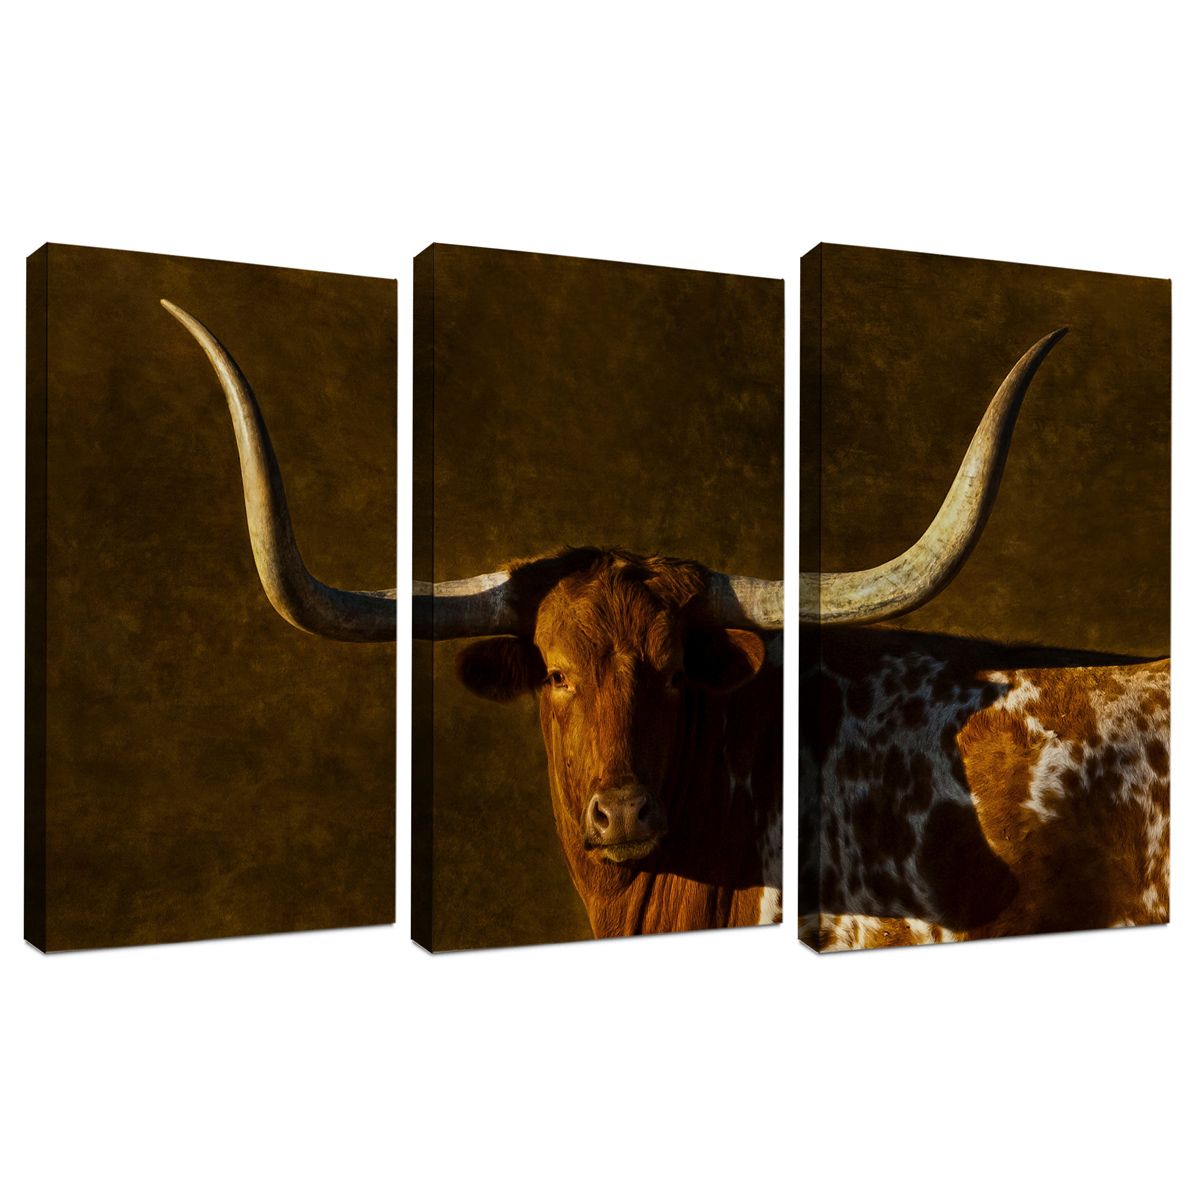 Longhorn Legacy Triptych Wall Art – Set Of 3 Throughout Long Horn Wall Art (View 13 of 15)